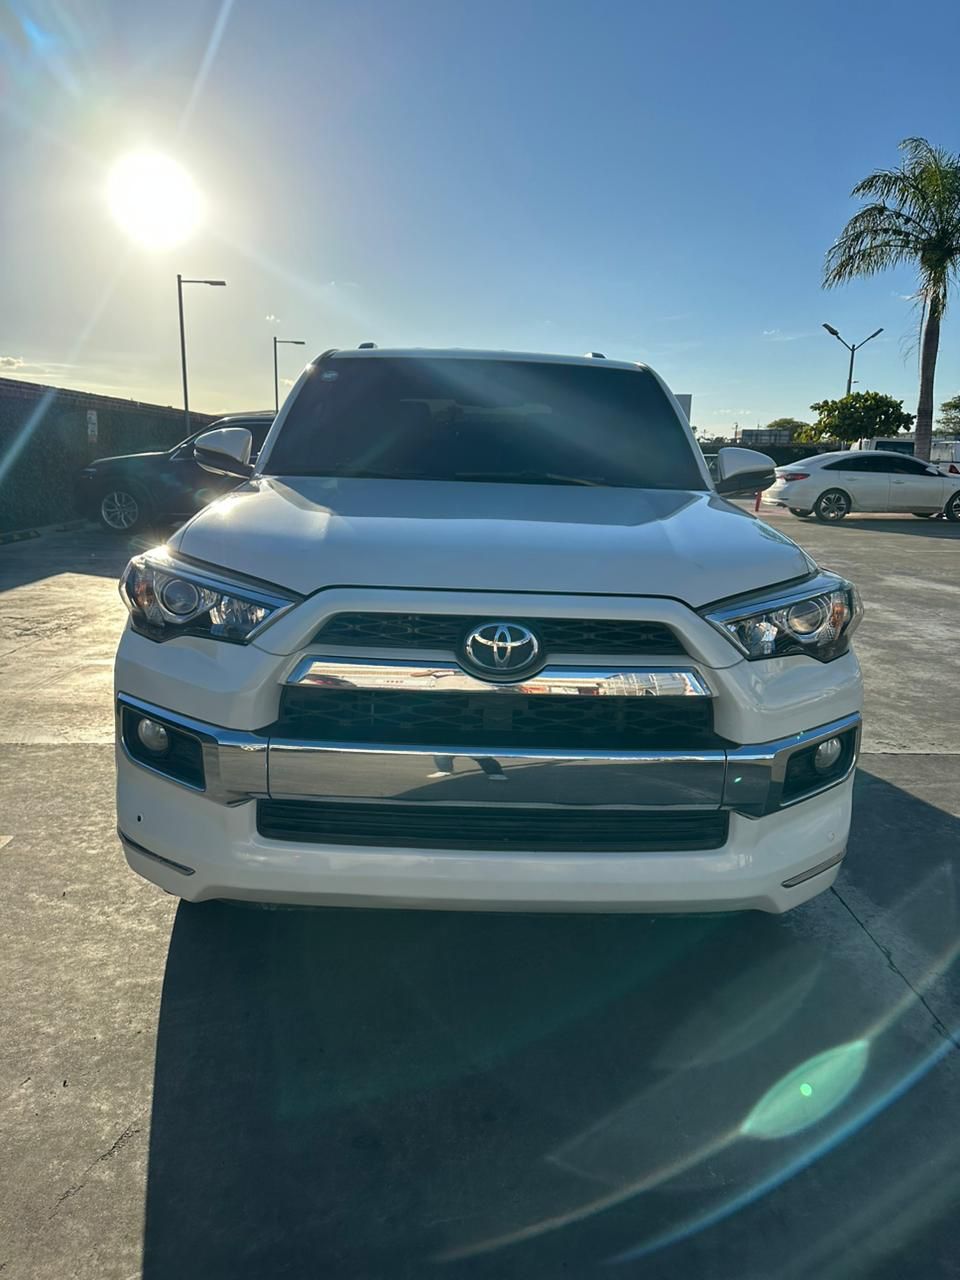 jeepetas y camionetas - Toyota 4runner limited 2014 0